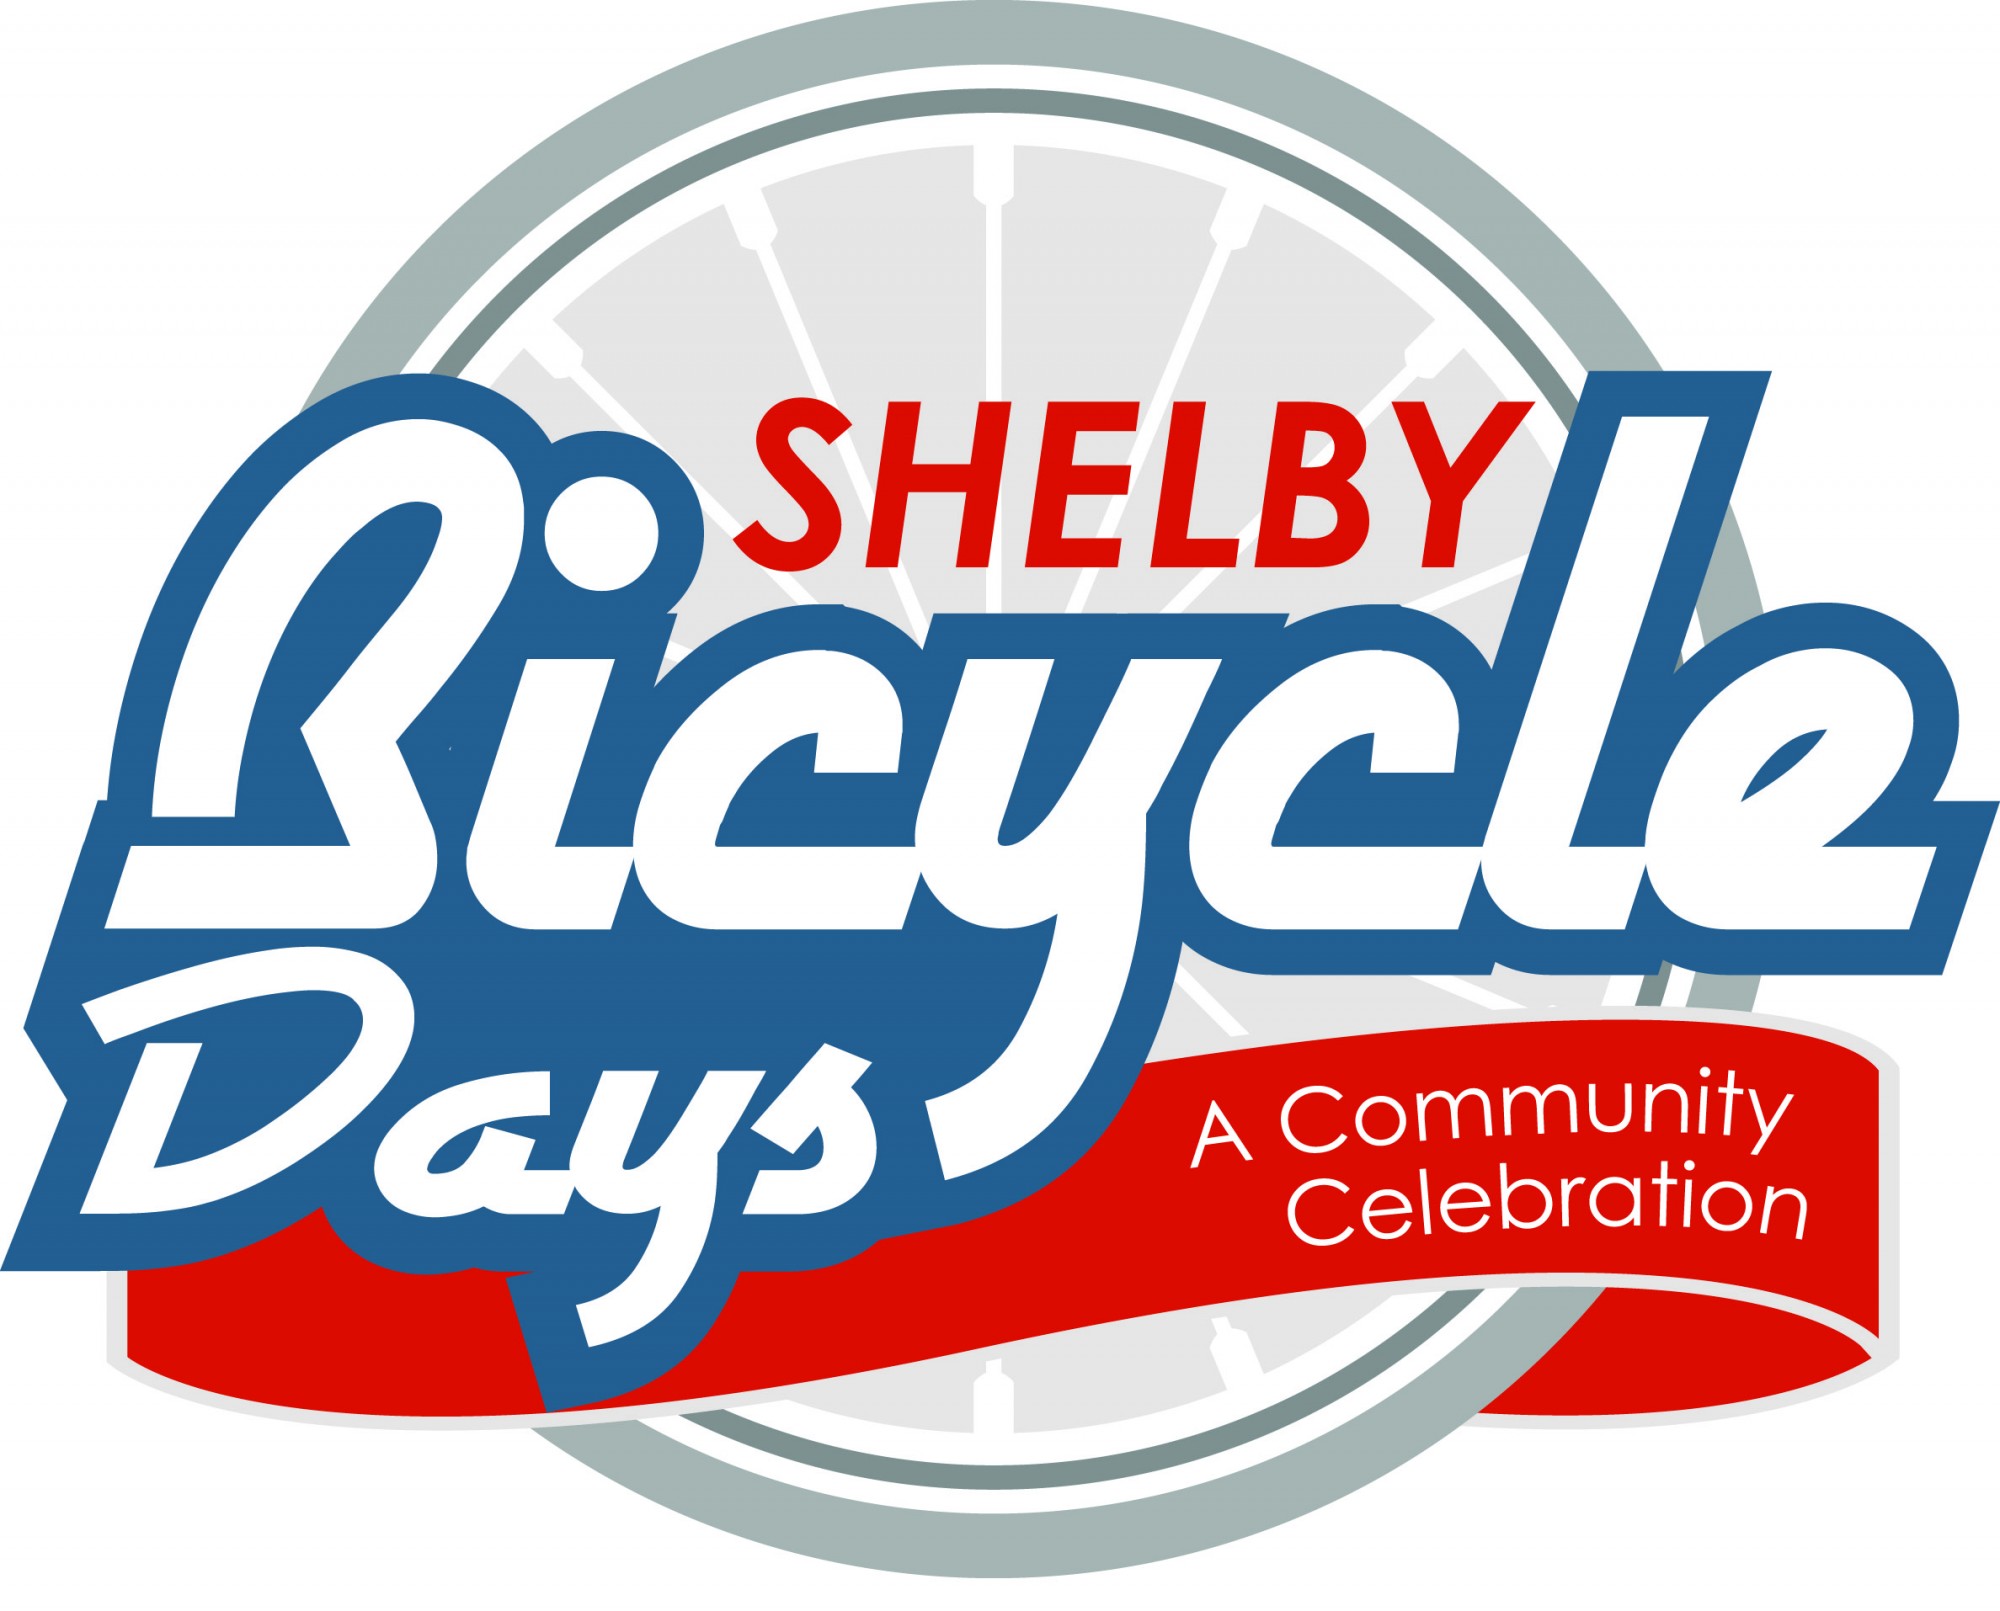 Shelby Bicycle Days